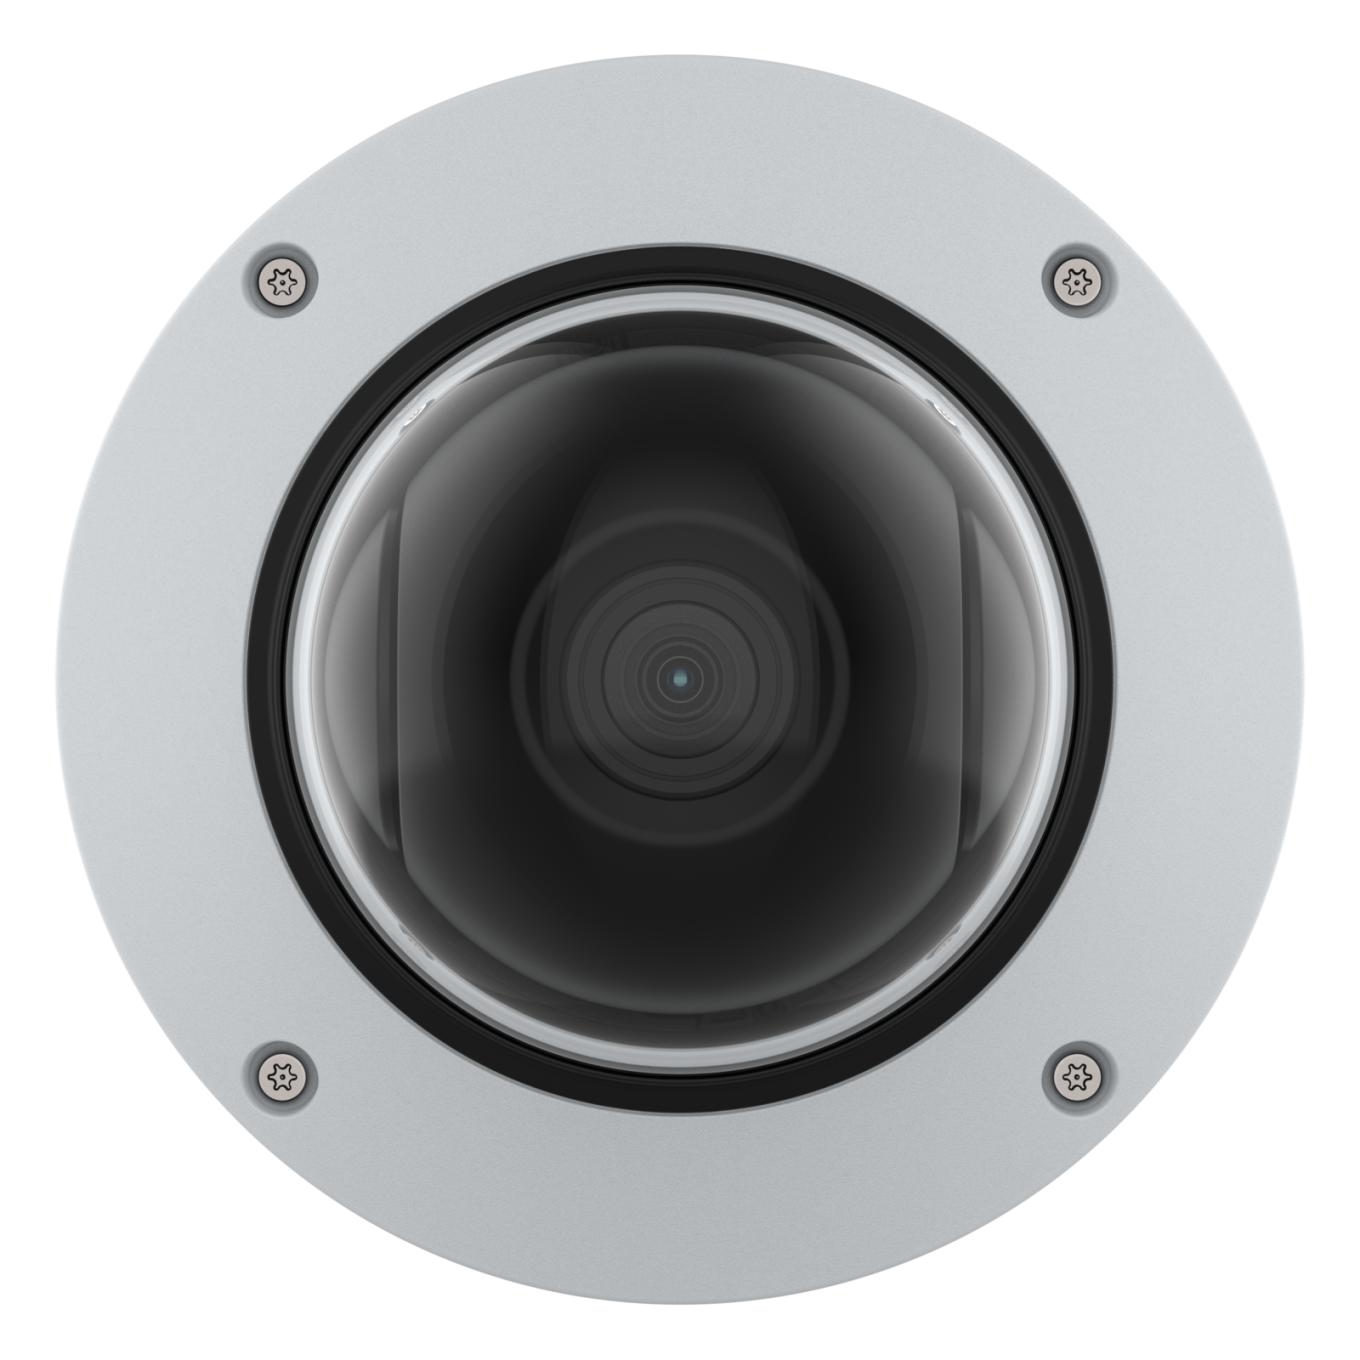 AXIS Q3628-VE Dome Camera